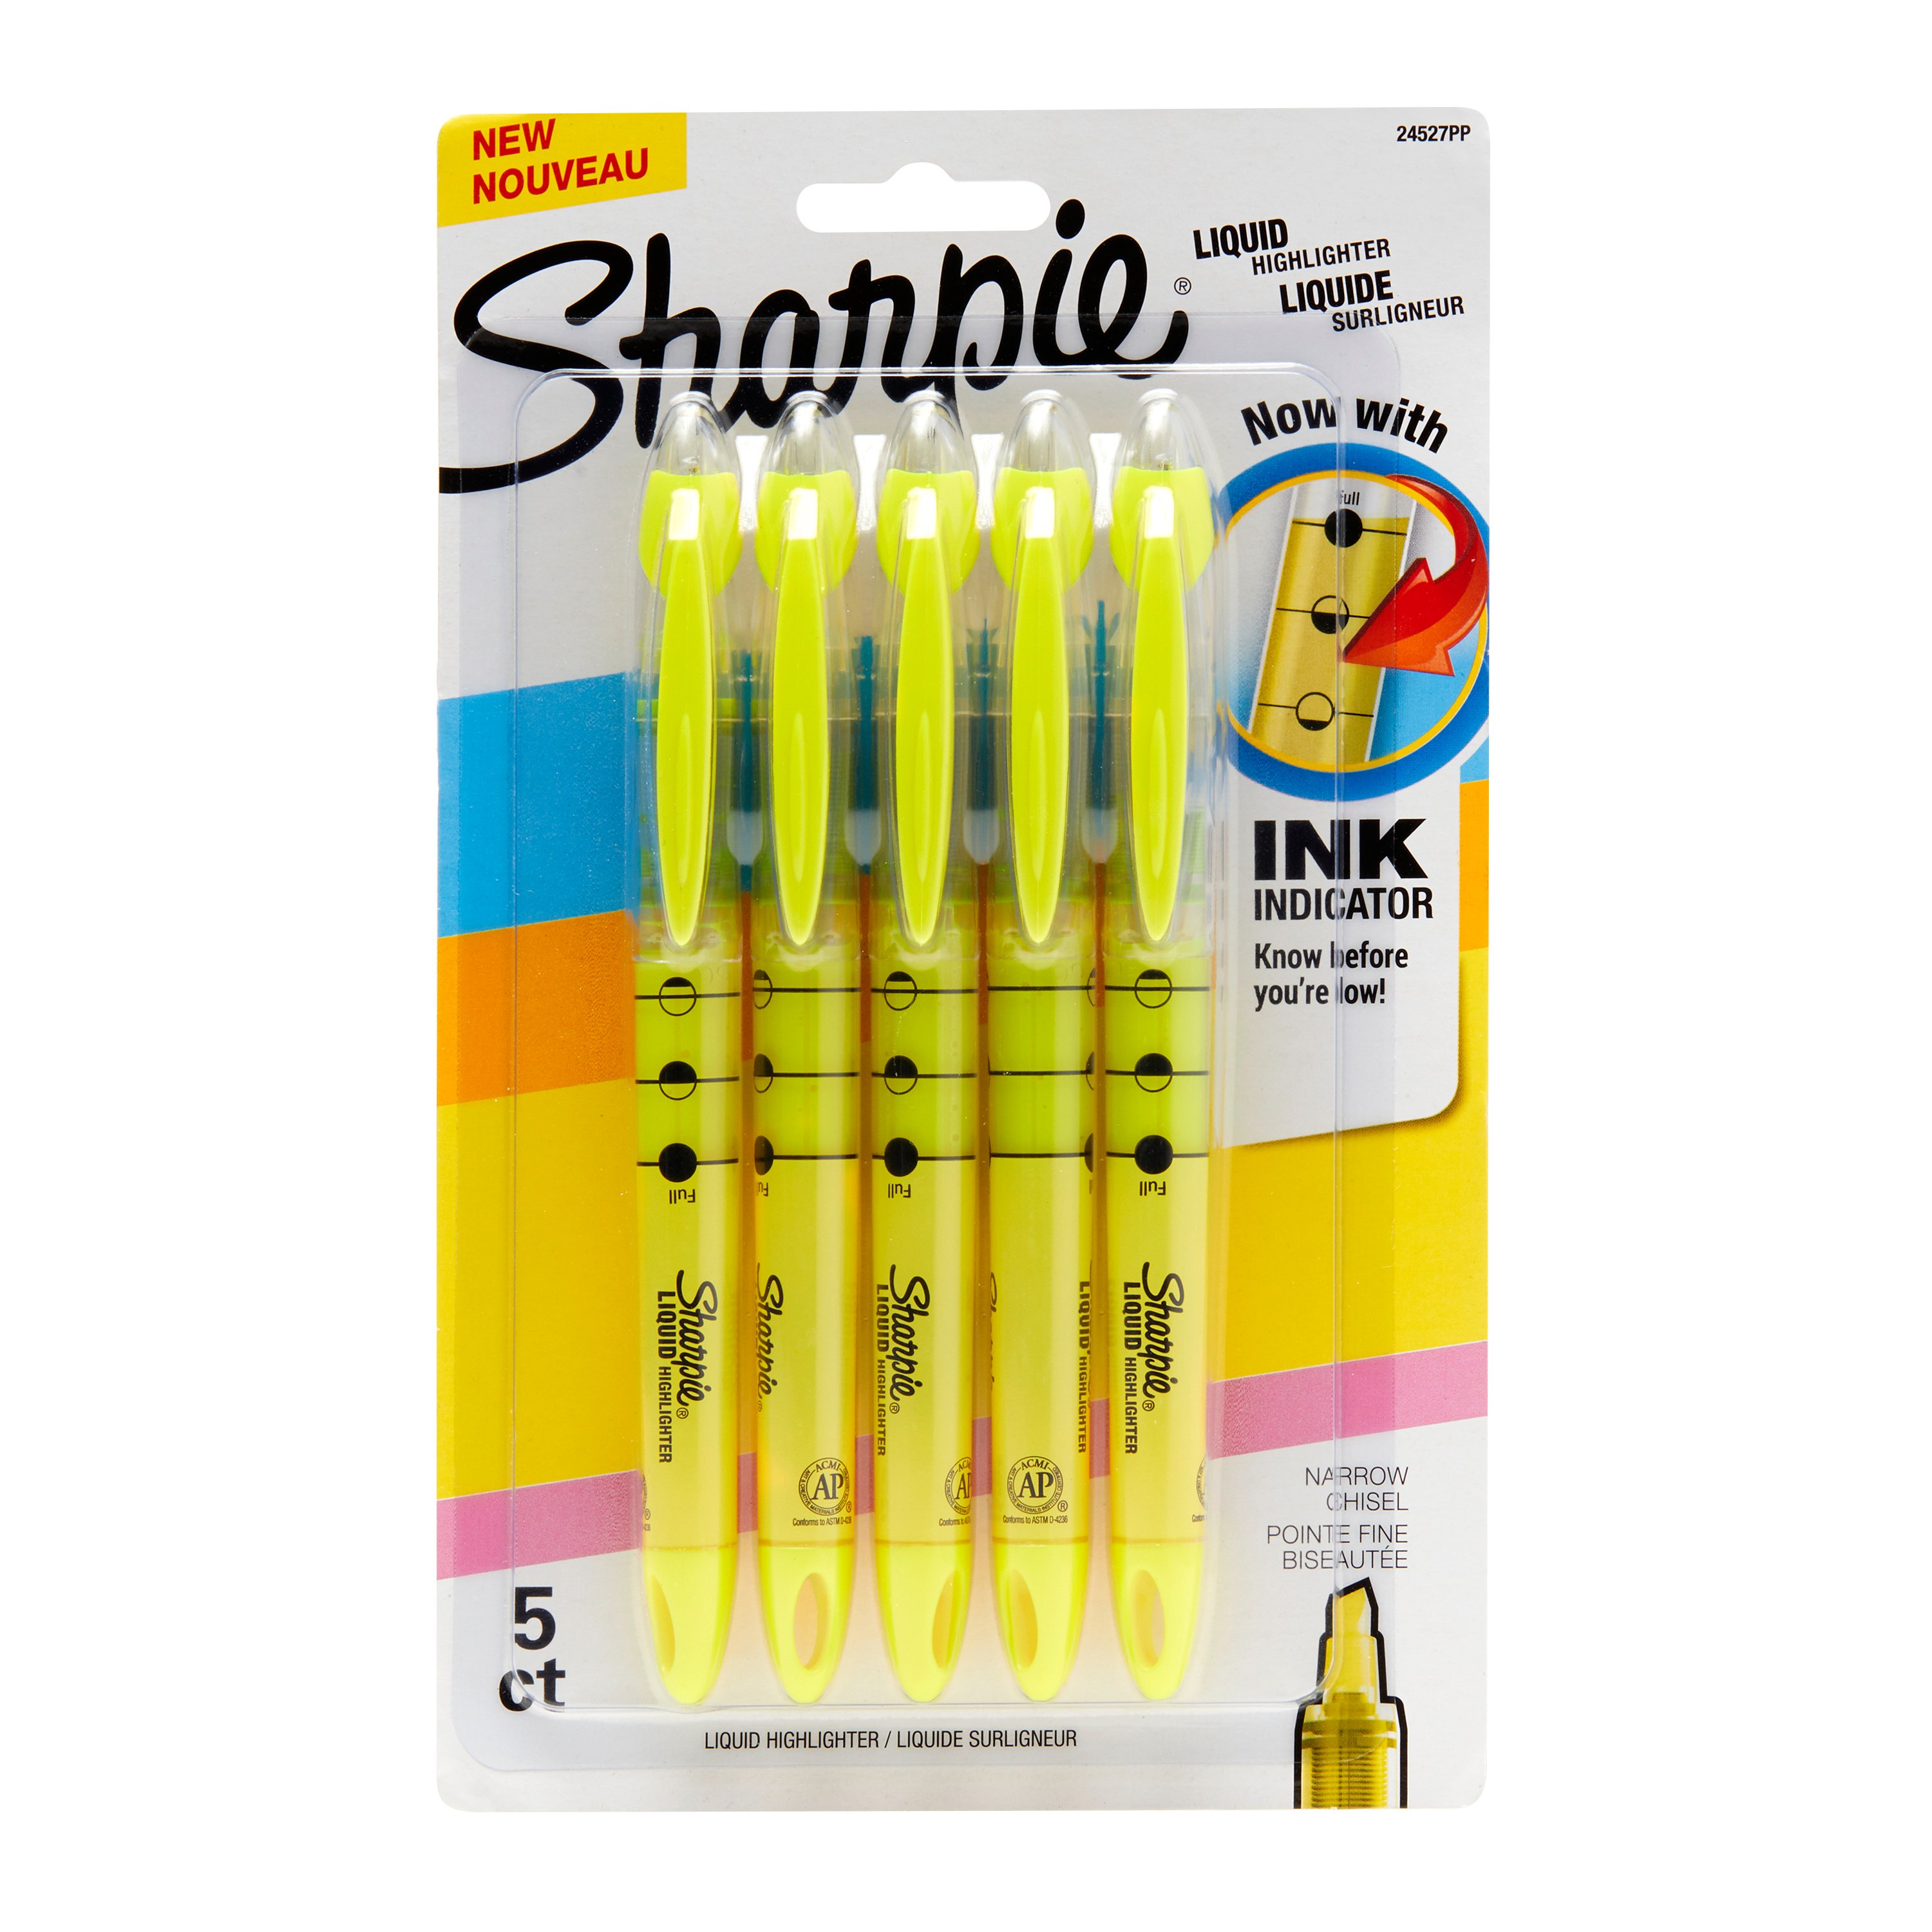 BRAND NEW NARROW CHISEL SHARPIE KNOW BEFORE YOU'RE LOW 5 PACK HIGHLIGHTERS